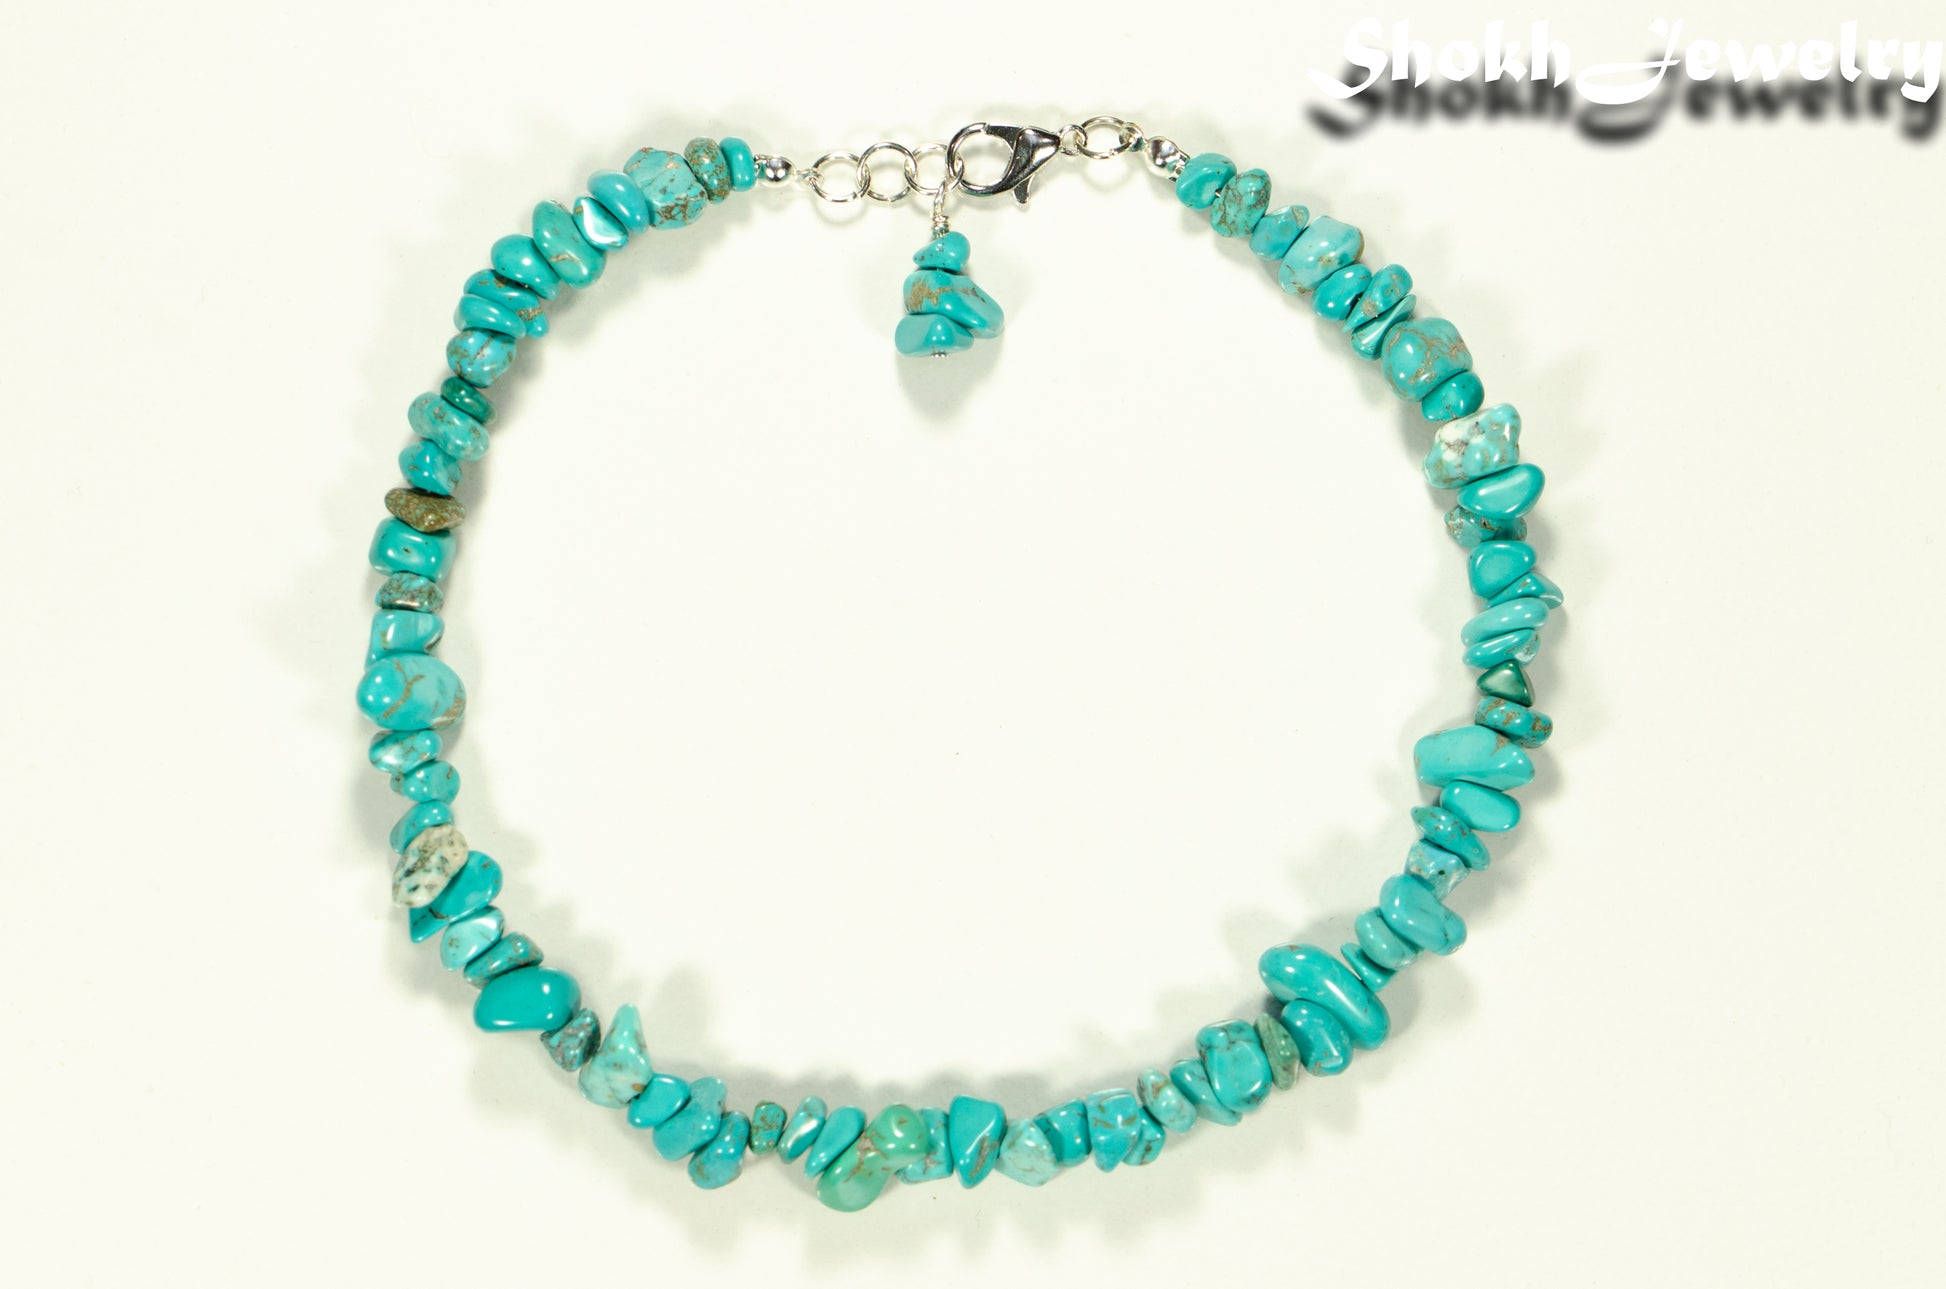 Top view of Natural Turquoise Crystal Chip Anklet.